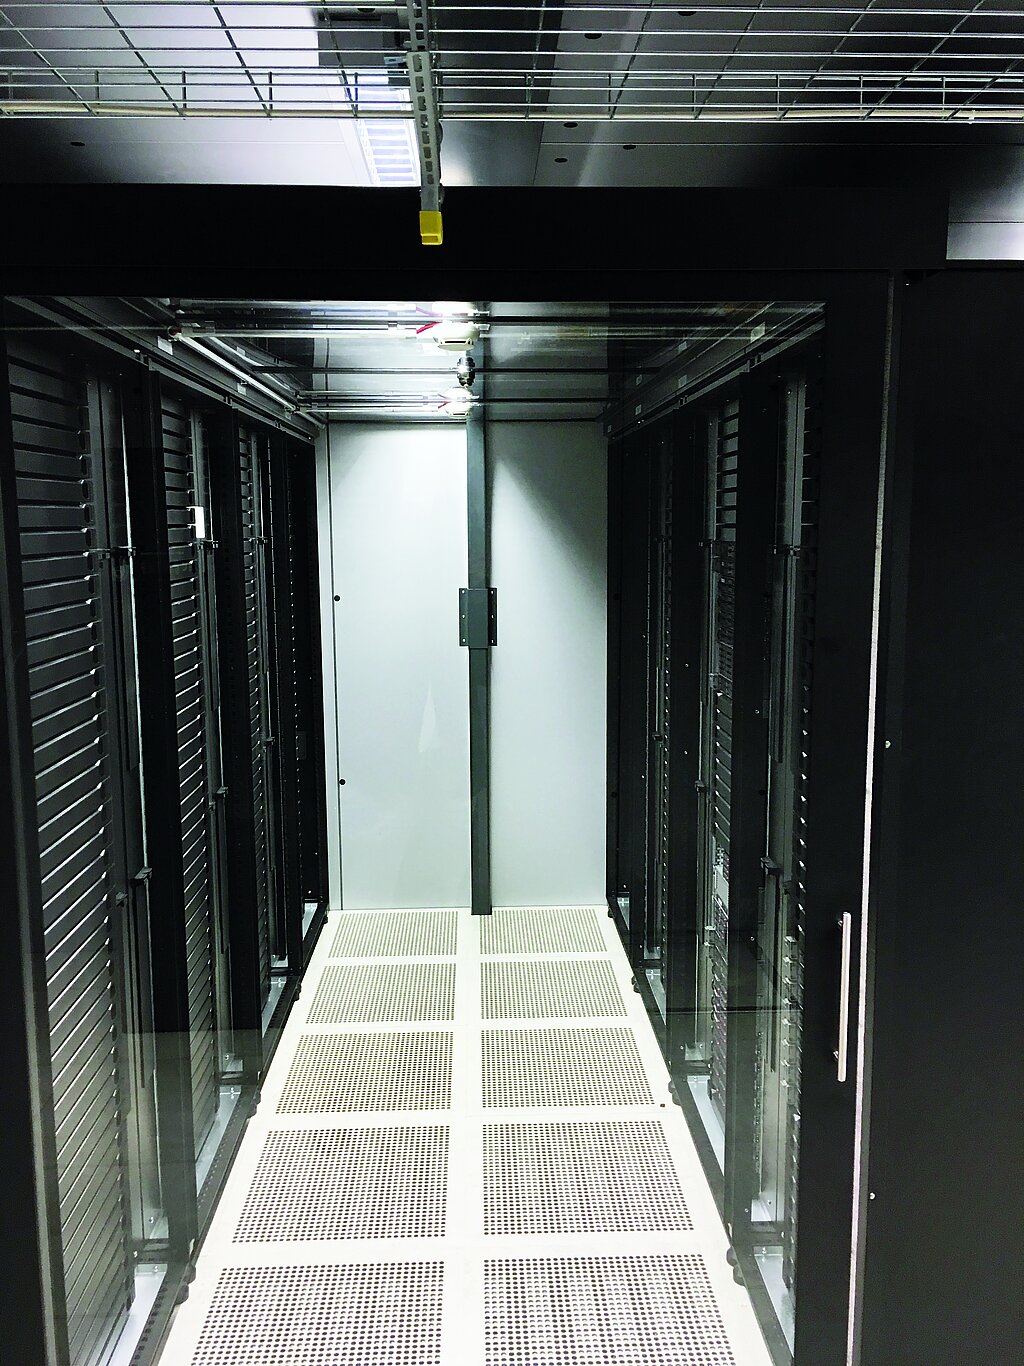 Server aisle with black cabinets left and right